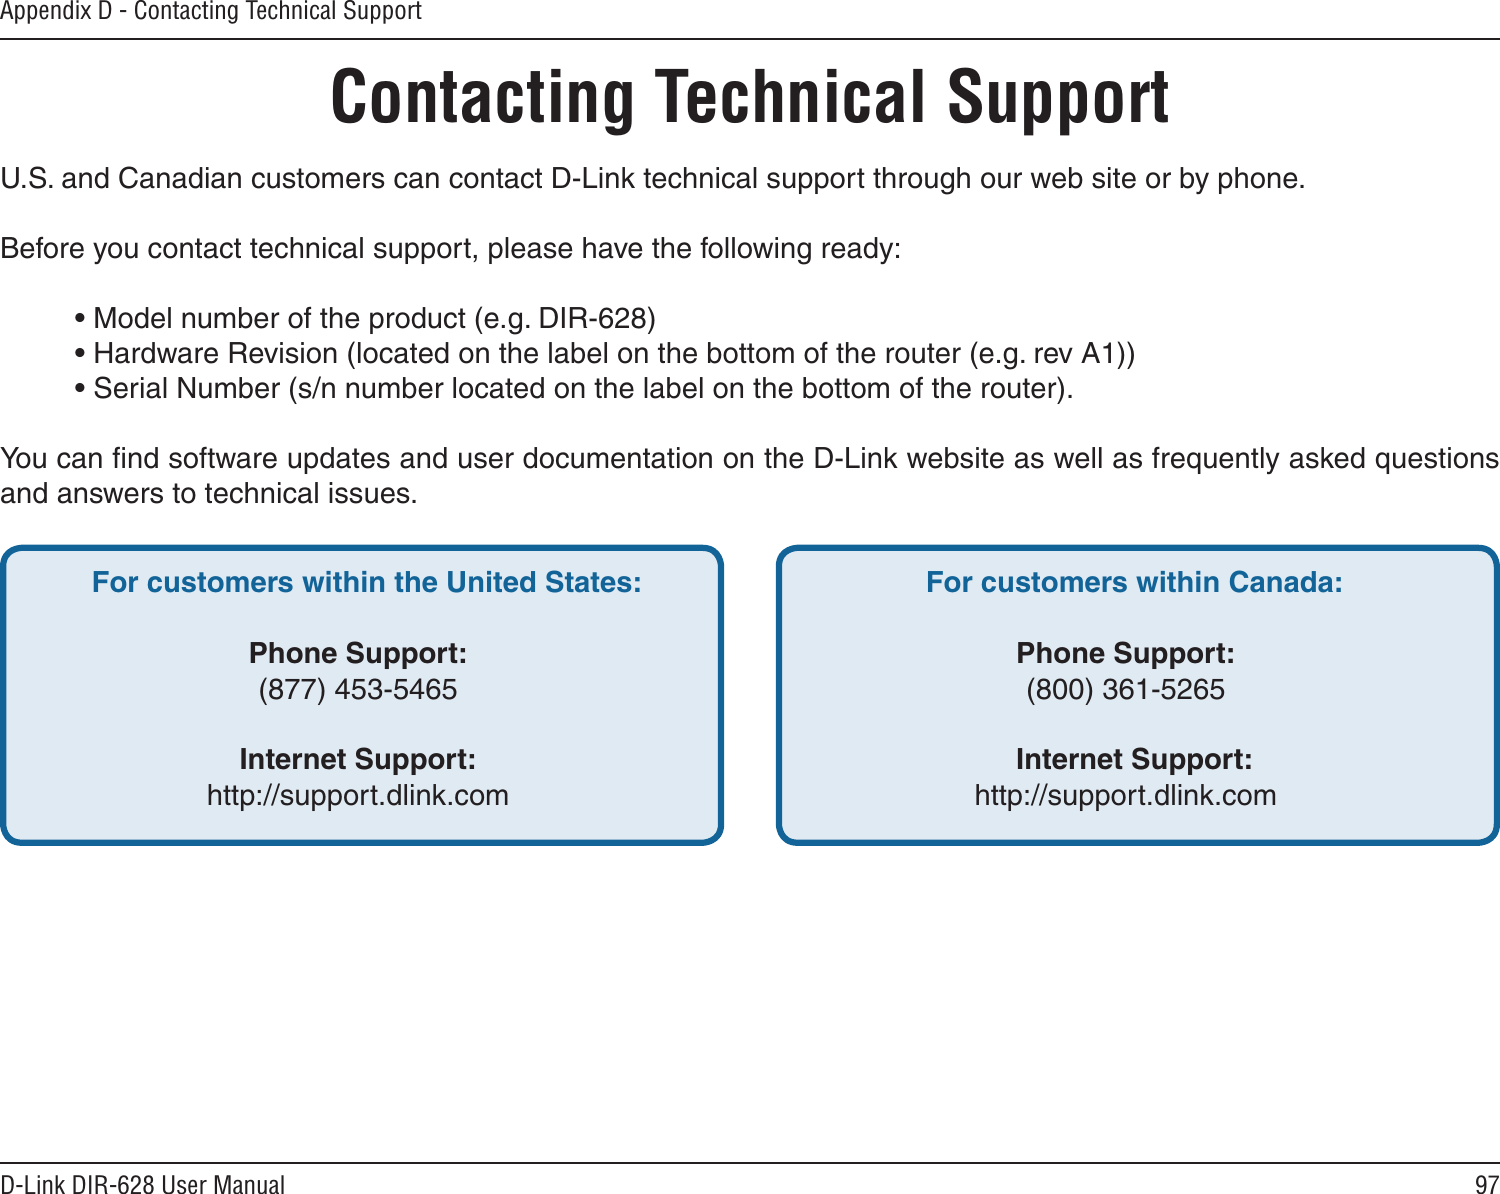 97D-Link DIR-628 User ManualAppendix D - Contacting Technical SupportContacting Technical SupportU.S. and Canadian customers can contact D-Link technical support through our web site or by phone.Before you contact technical support, please have the following ready:  • Model number of the product (e.g. DIR-628)  • Hardware Revision (located on the label on the bottom of the router (e.g. rev A1))  • Serial Number (s/n number located on the label on the bottom of the router). You can ﬁnd software updates and user documentation on the D-Link website as well as frequently asked questions and answers to technical issues.For customers within the United States: Phone Support:(877) 453-5465Internet Support:http://support.dlink.com For customers within Canada: Phone Support:(800) 361-5265  Internet Support:http://support.dlink.com